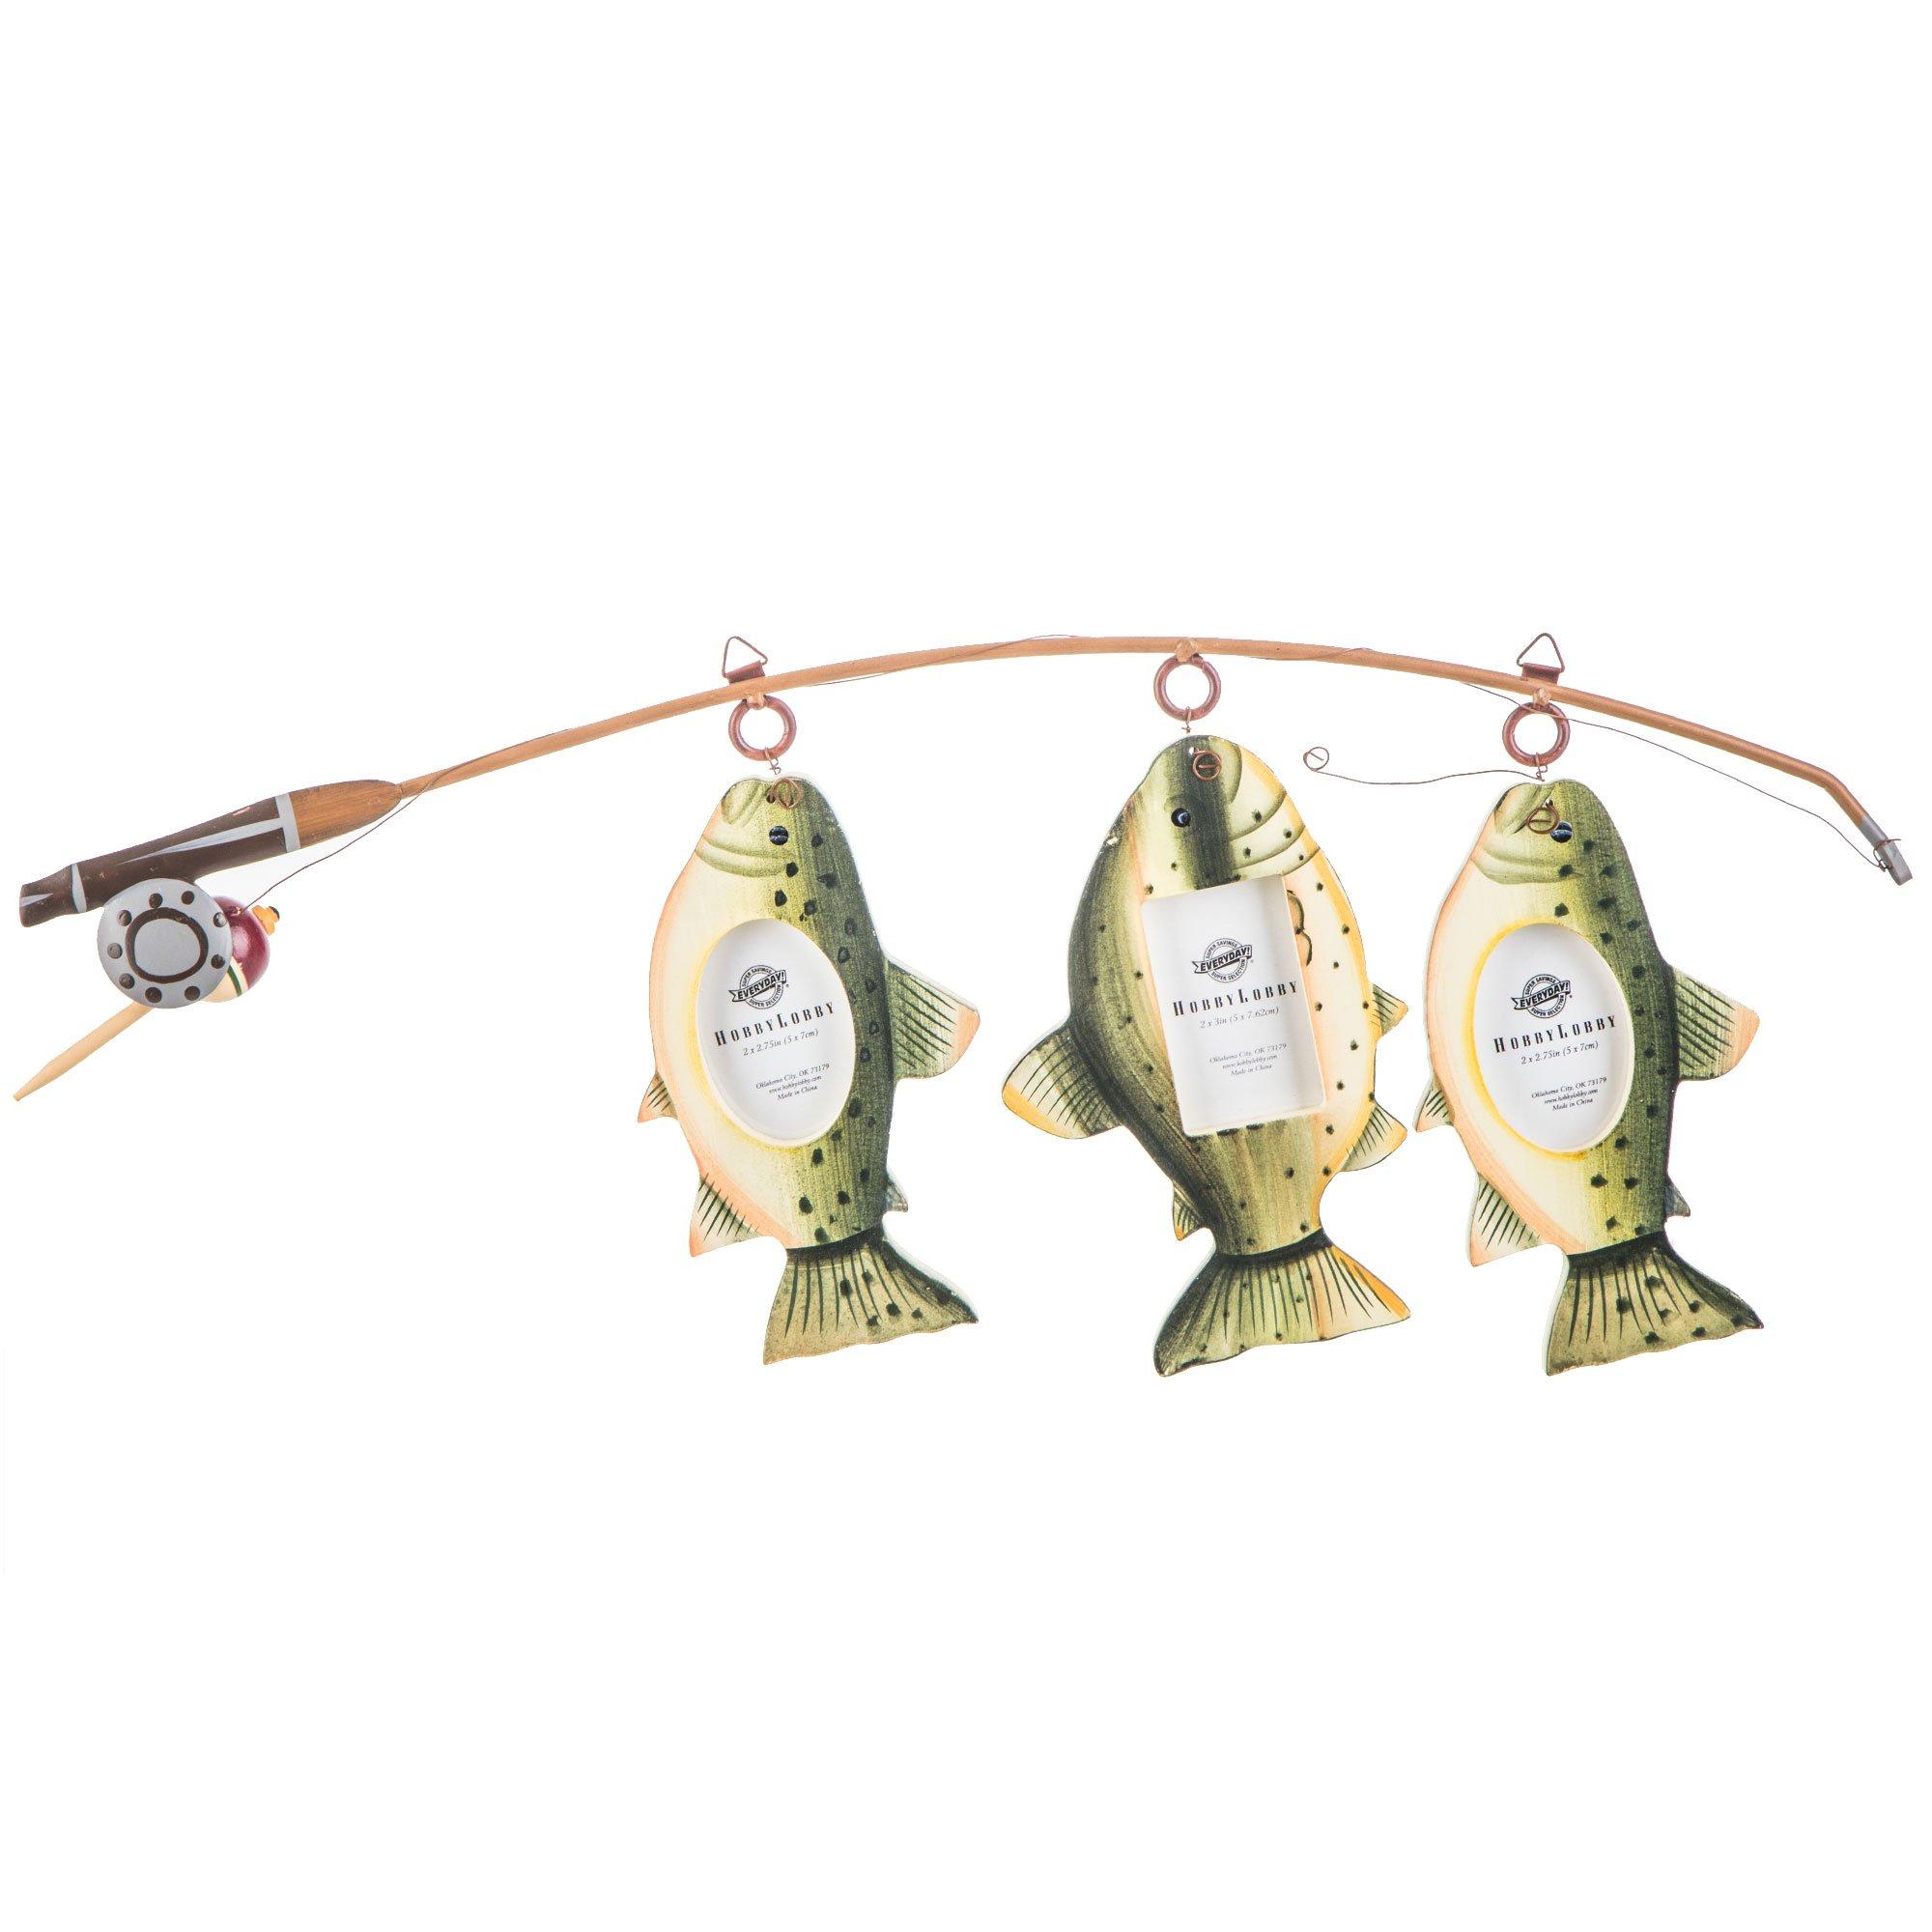 HOBBY LOBBY WALL Cabin Decor. Fishing Pole With 3 Fish Picture Frames.  $18.00 - PicClick